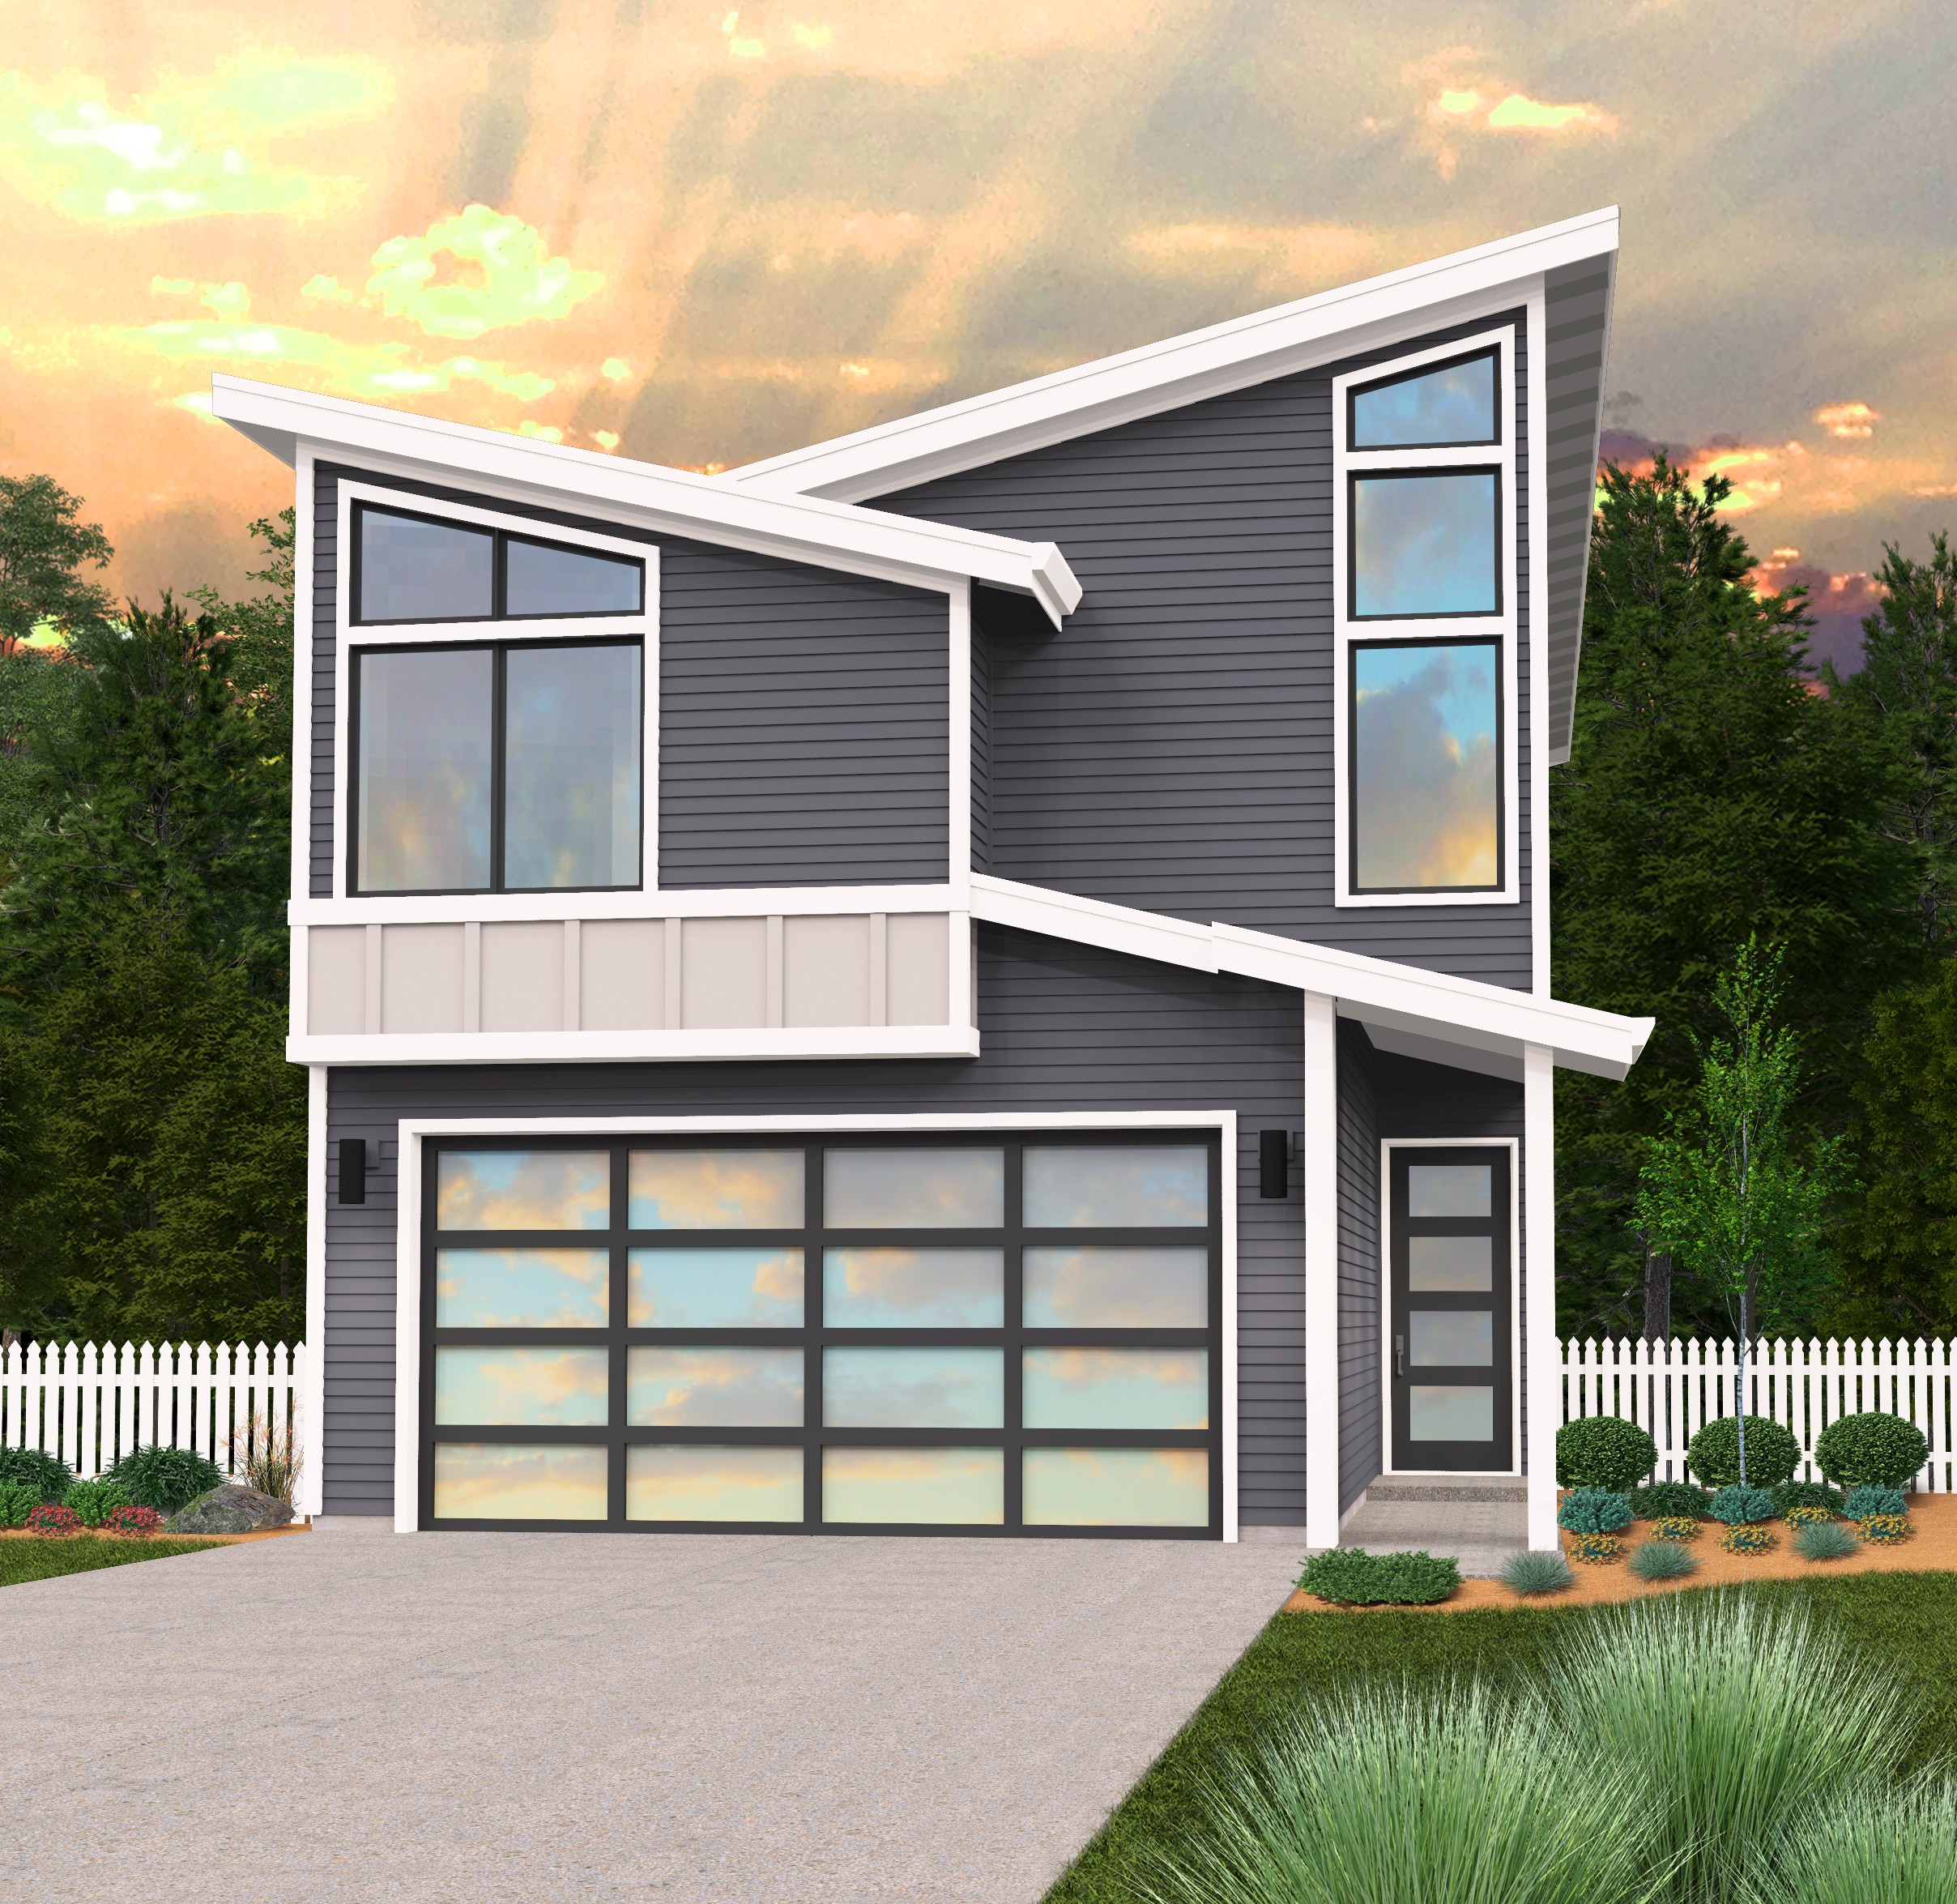 Narrow 2  story  Modern Home  Design with builders favorite 